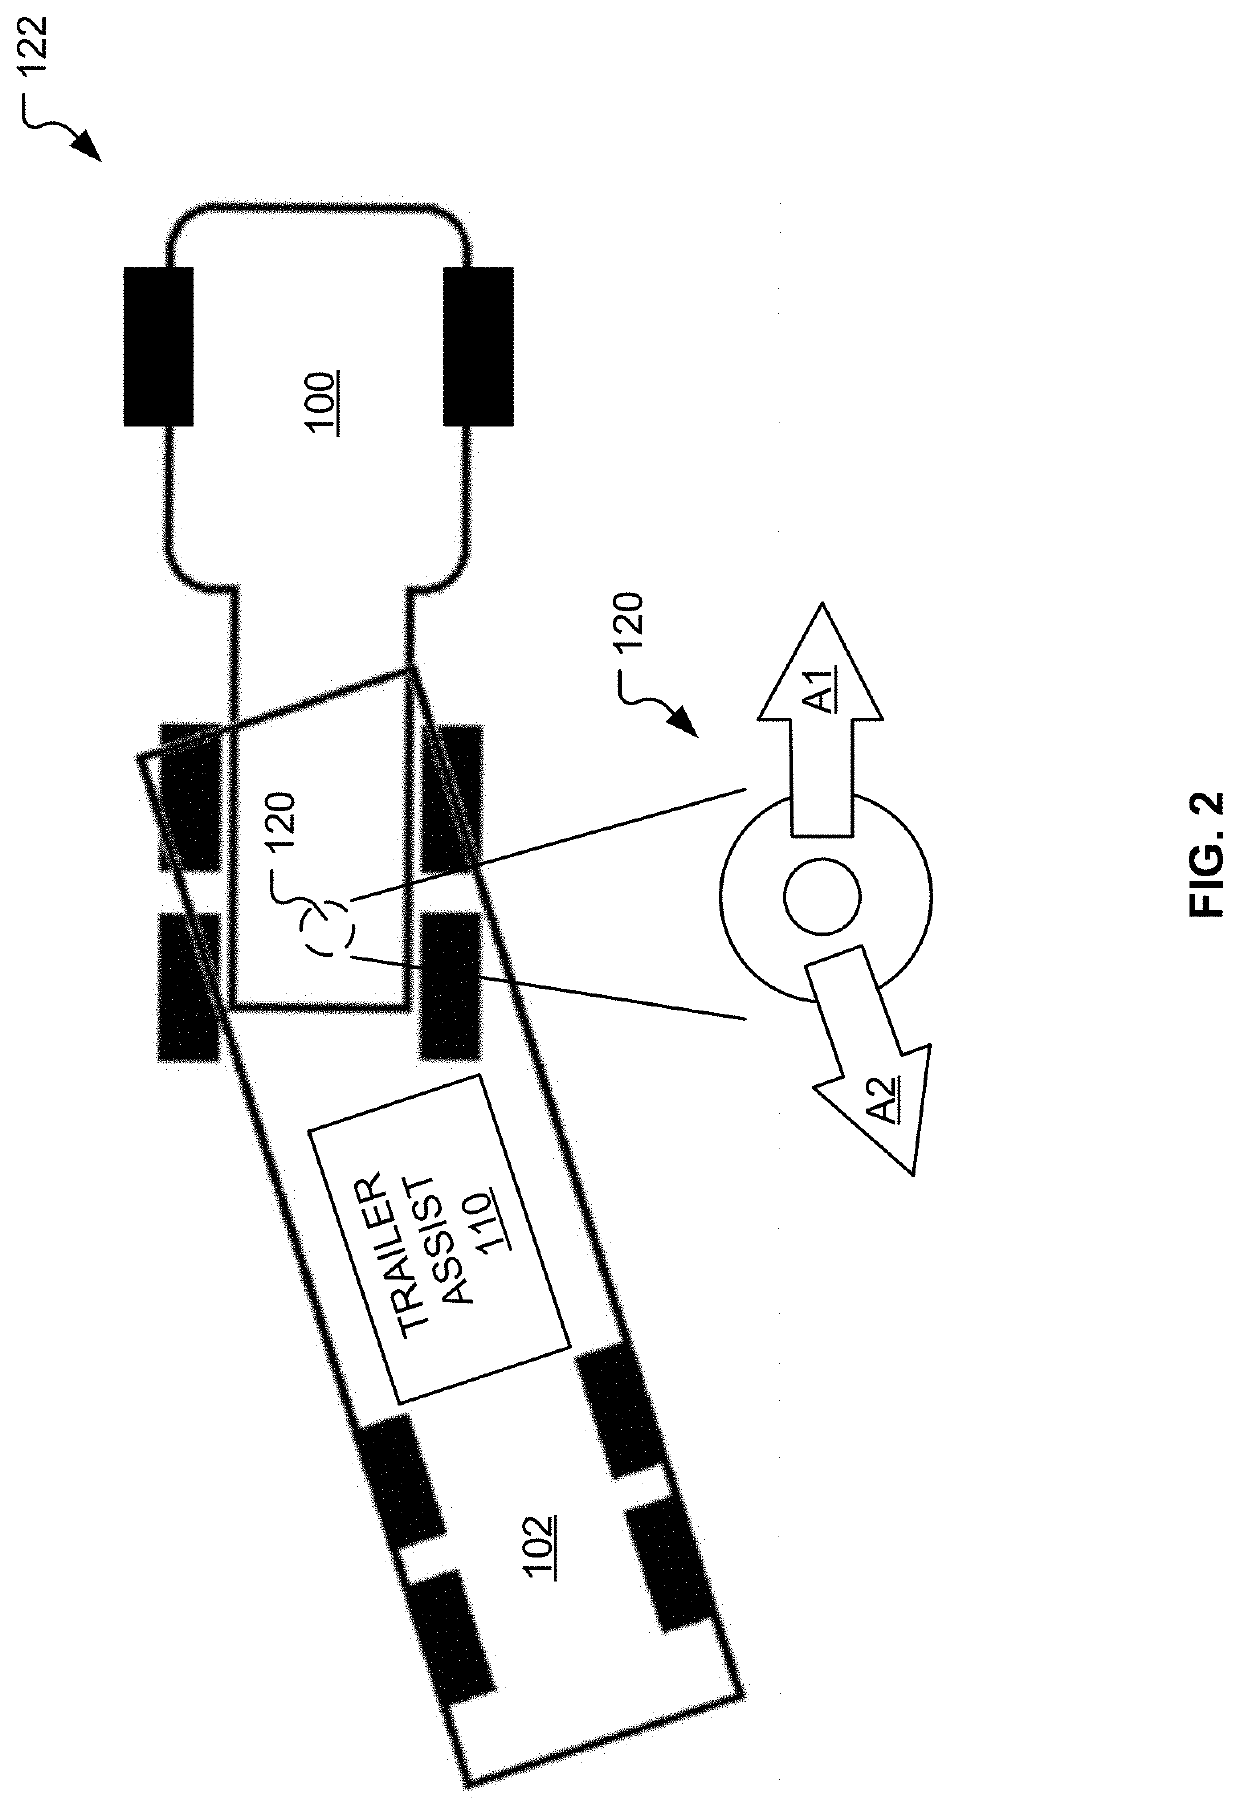 Electric assisted semi-trailer with smart kingpin sensor assembly